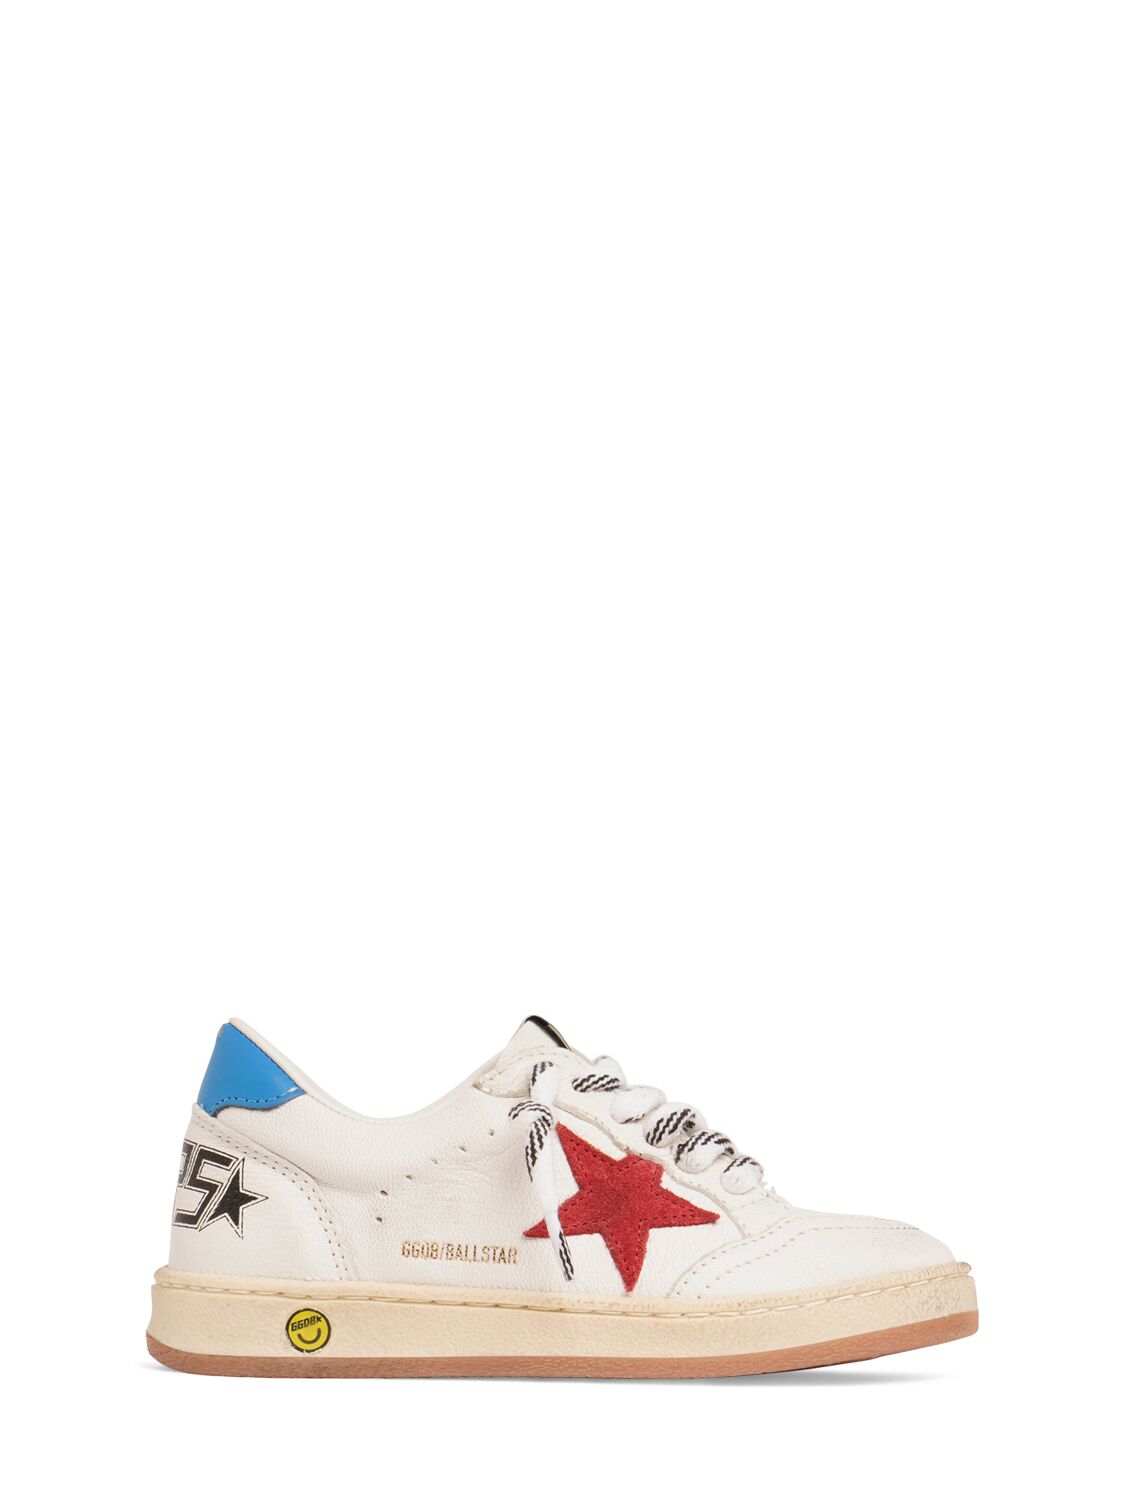 Golden Goose Kids' Ballstar Leather Lace-up Trainers In Red,white,blue